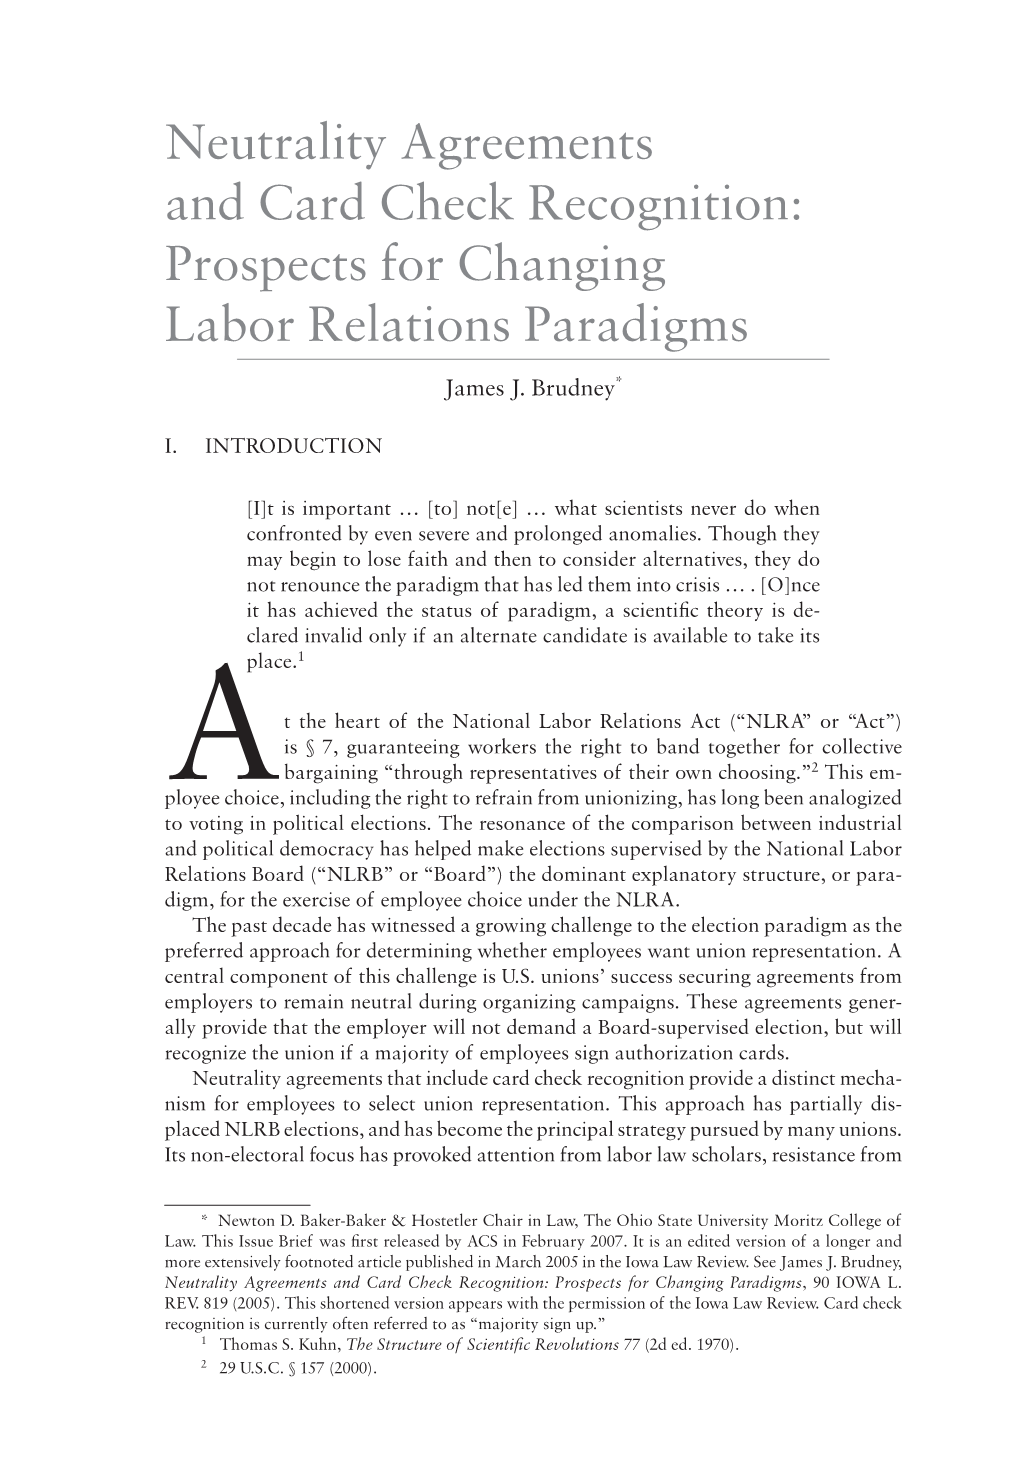 Neutrality Agreements and Card Check Recognition: Prospects for Changing Labor Relations Paradigms